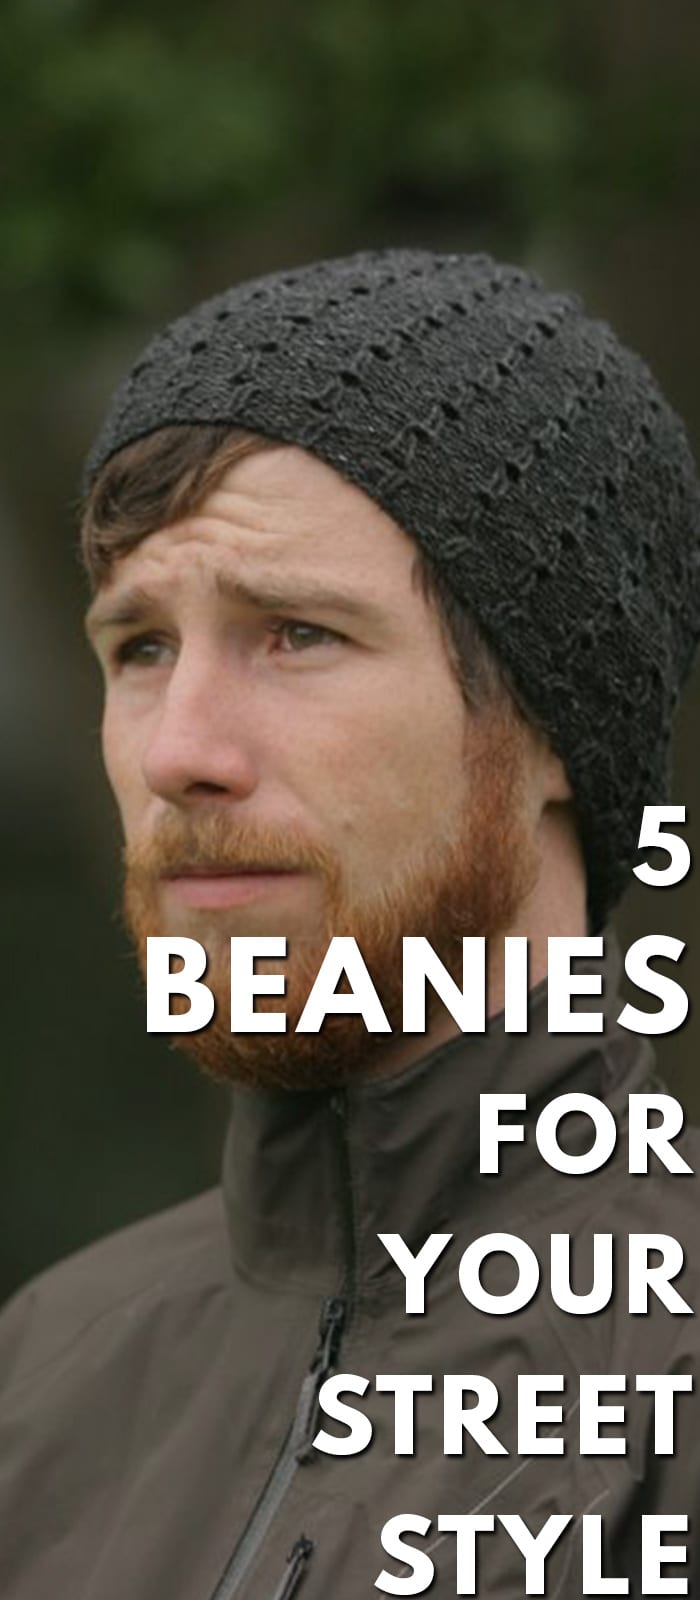 5 Beanies For Your-Street Style.